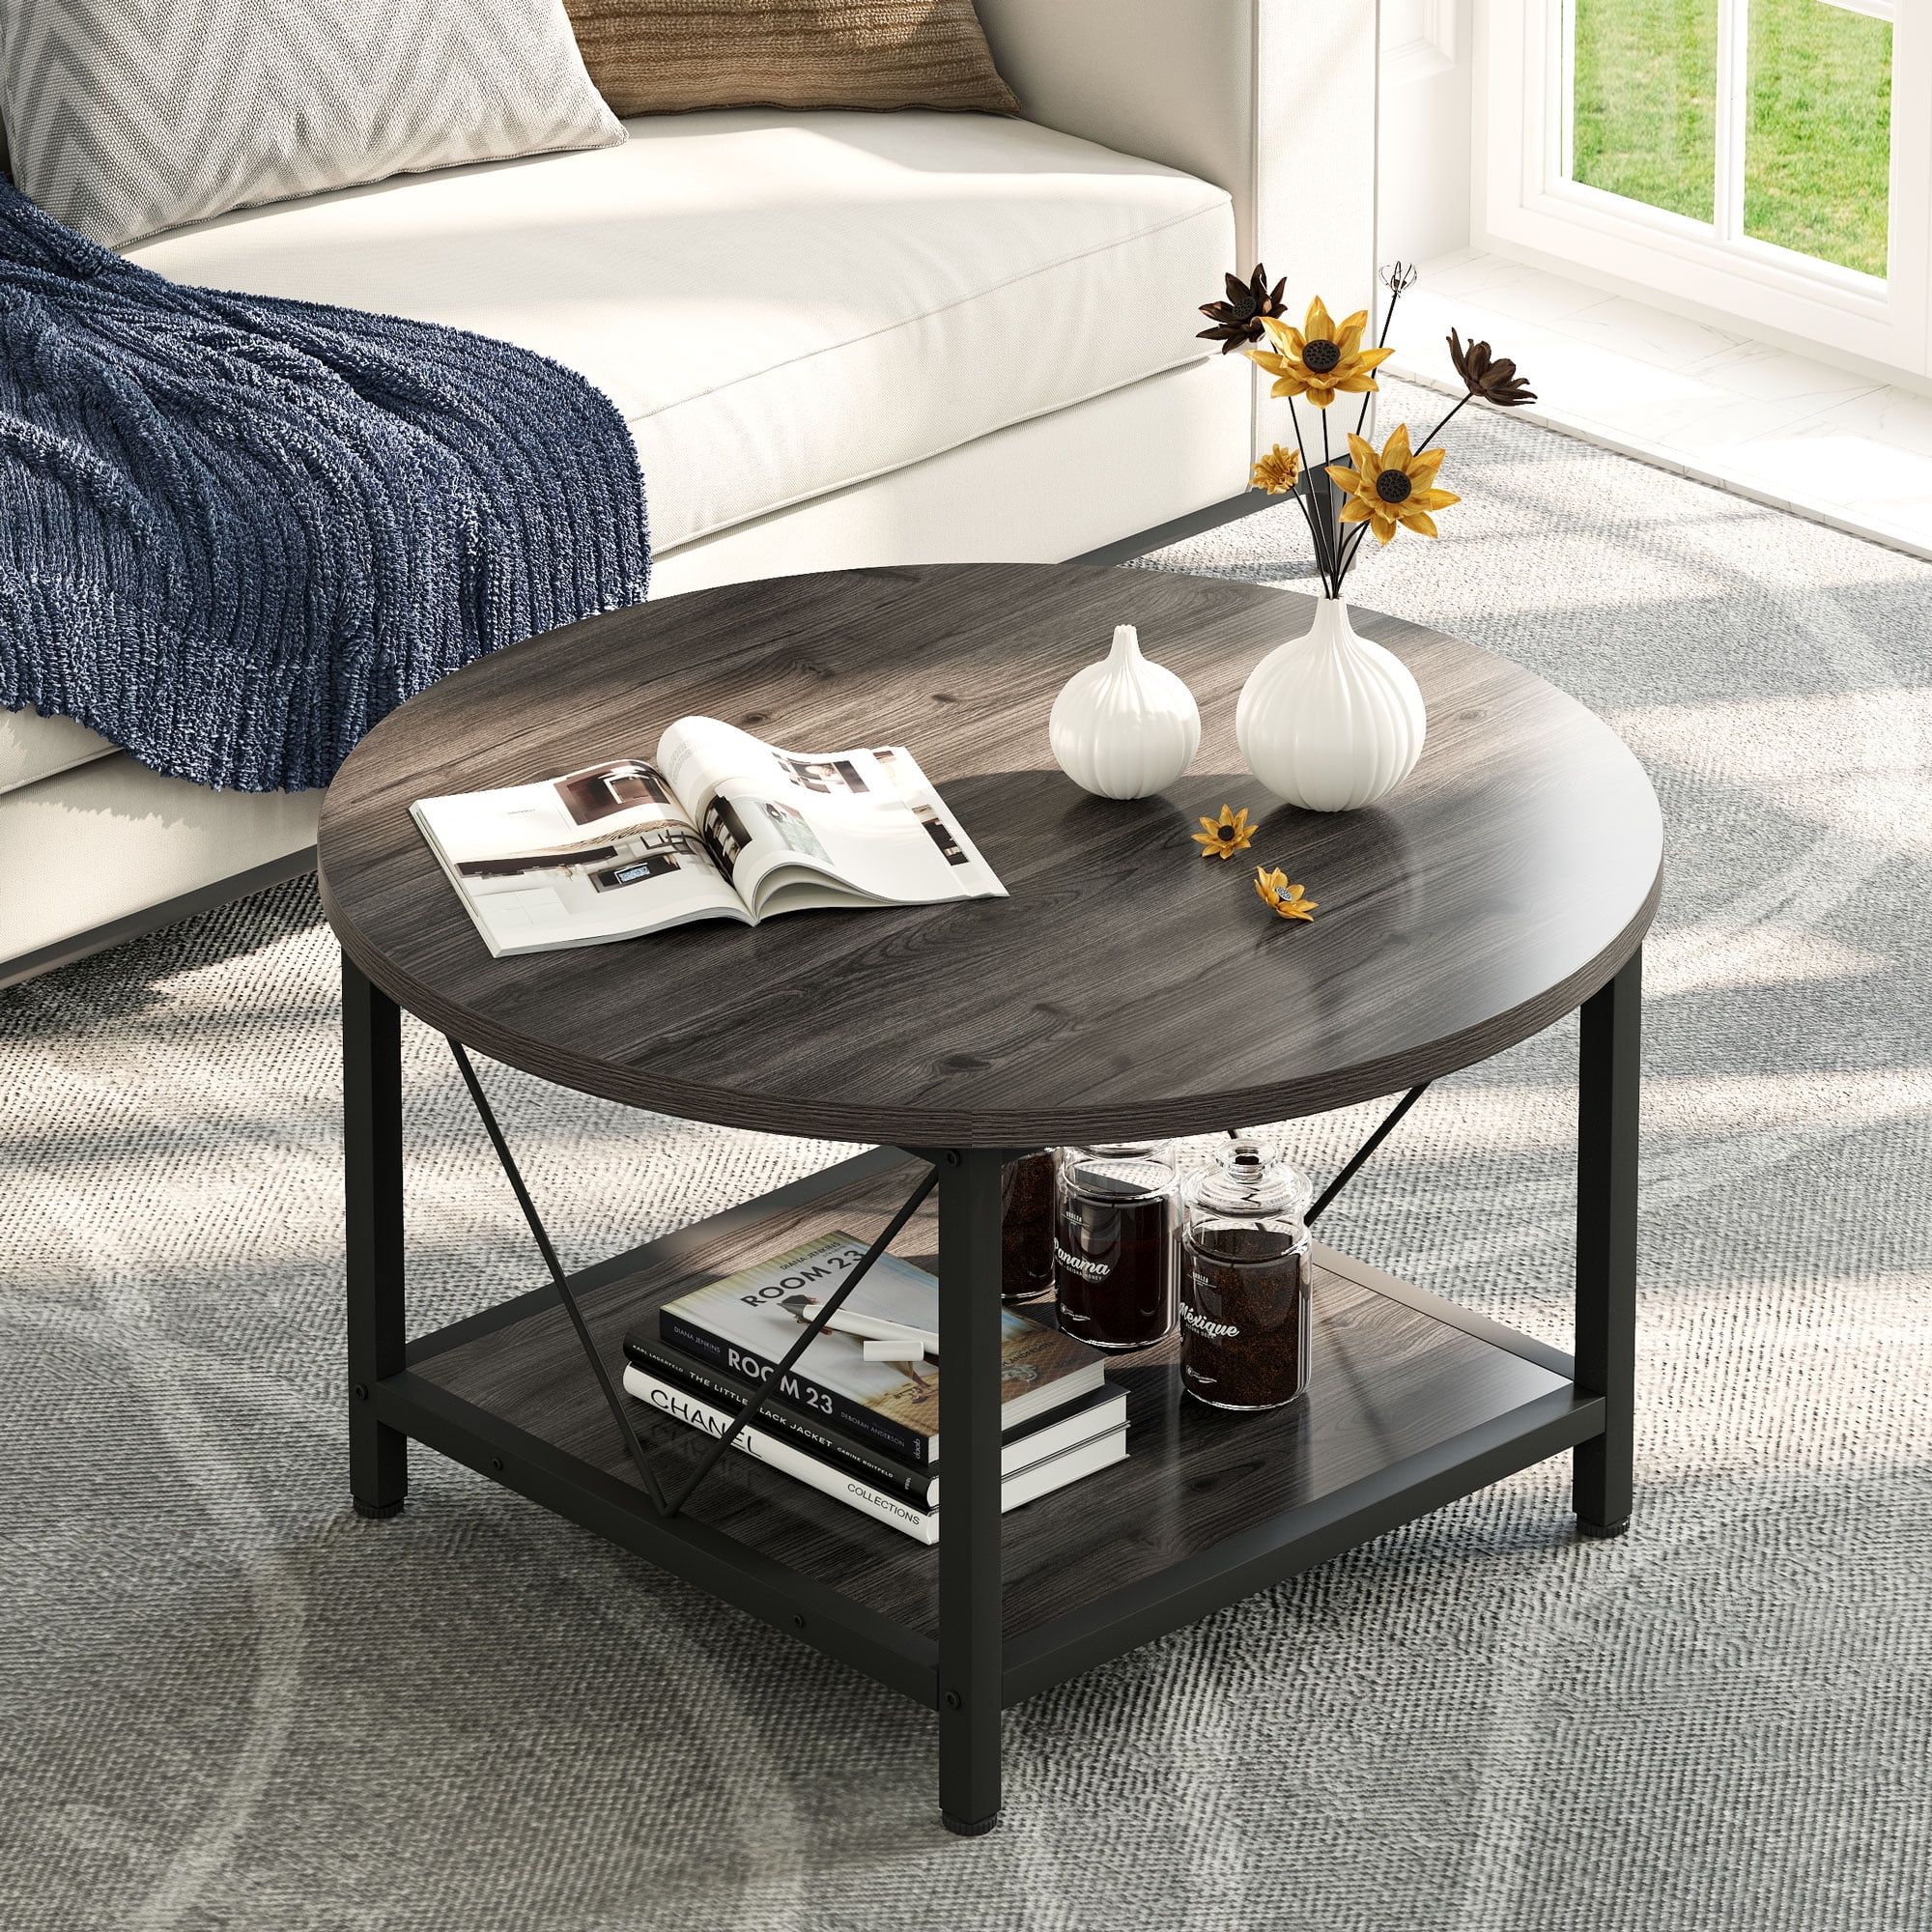 Dextrus Round Coffee Table With Storage, Rustic Living Room Tables With  Sturdy Metal Legs, Dark Gray – Walmart Throughout Coffee Tables With Metal Legs (View 9 of 15)